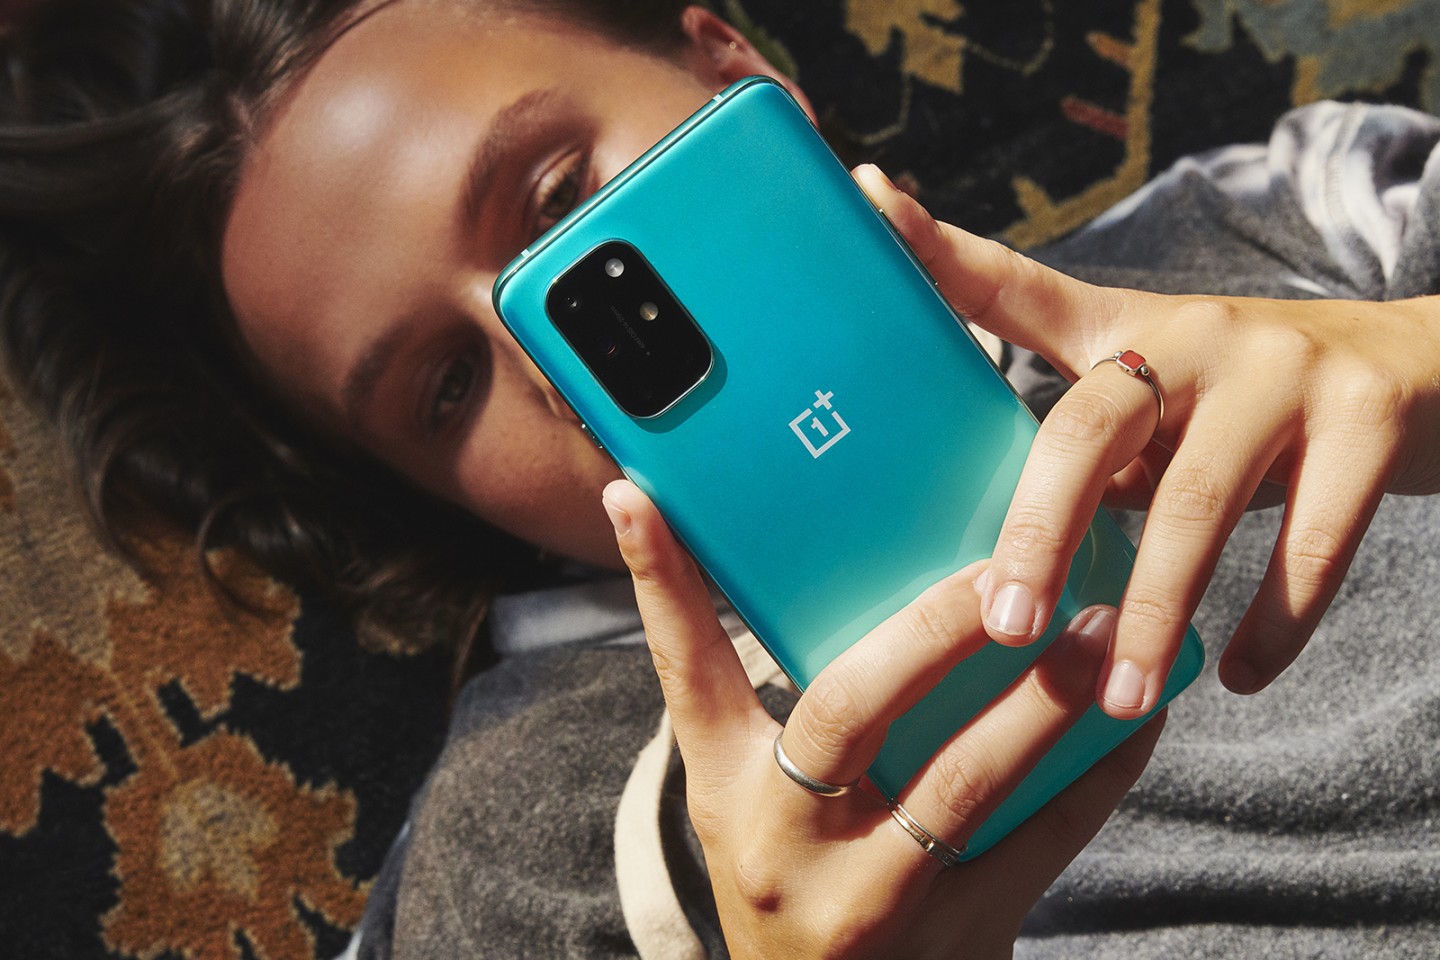 This is the OnePlus 8T, which should get a successor around March time